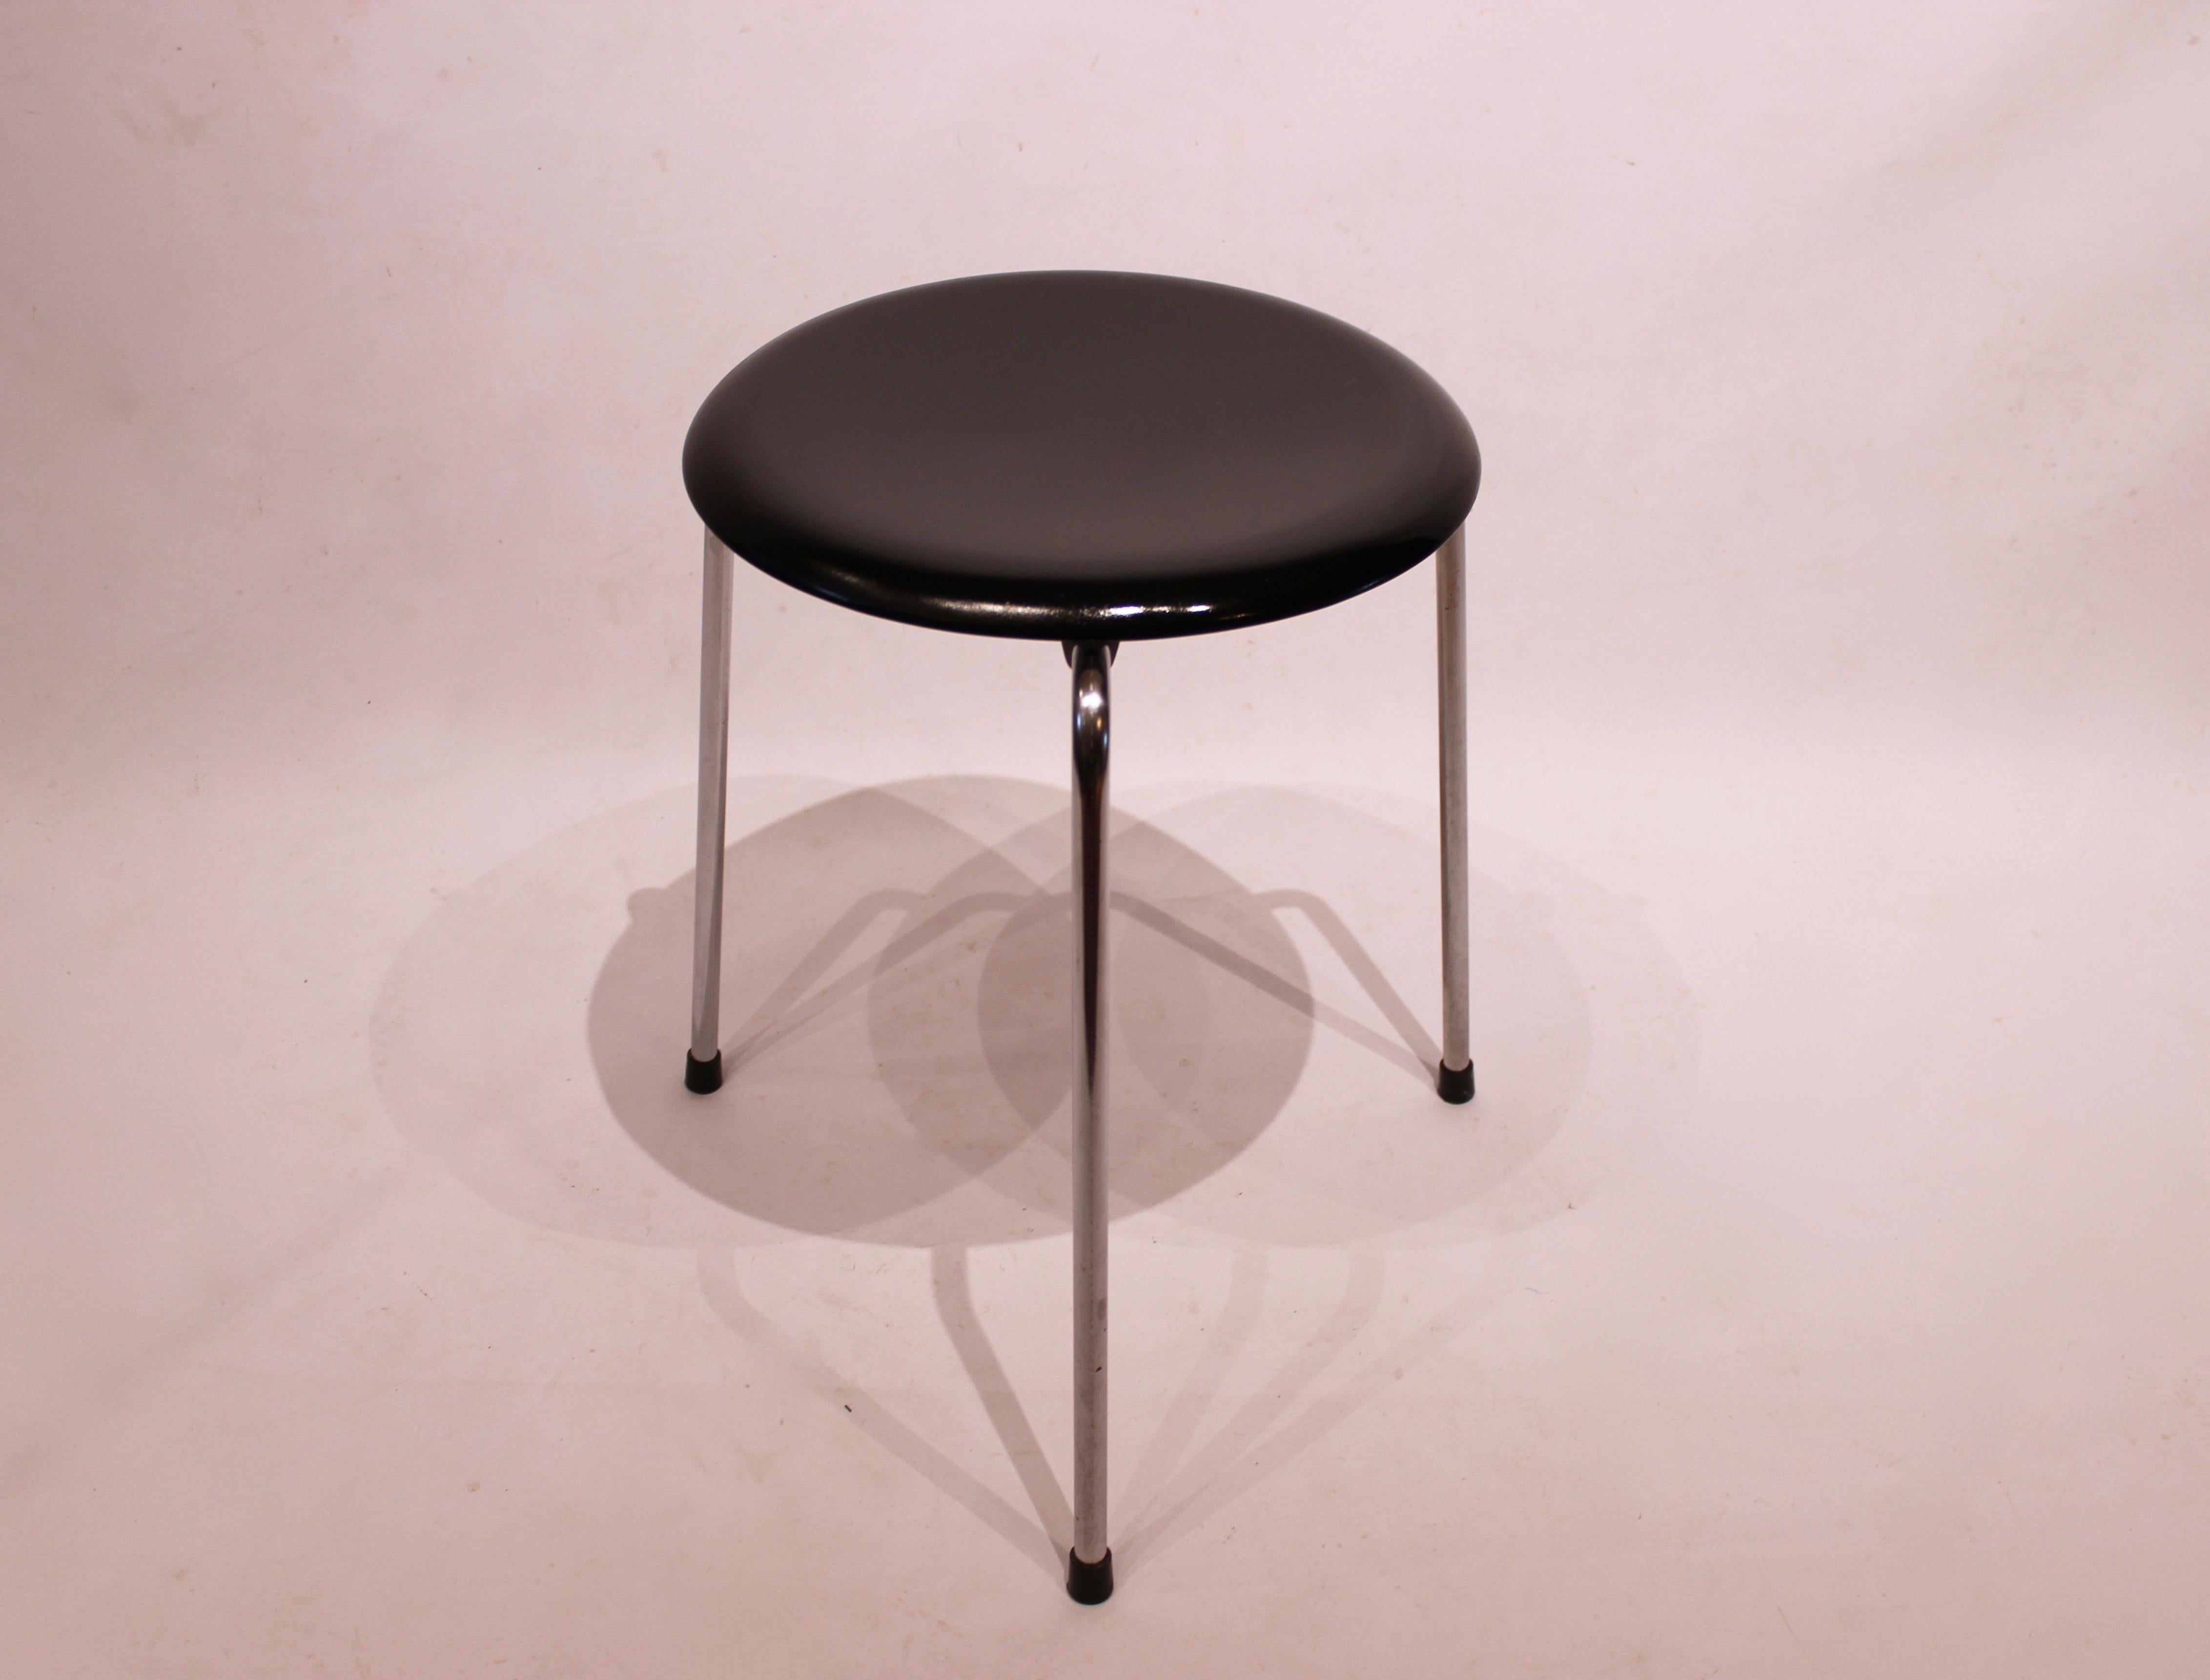 A pair of Dot stools in black designed by Arne Jacobsen and manufactured by Fritz Hansen in 1971. The stools are of great vintage condition.